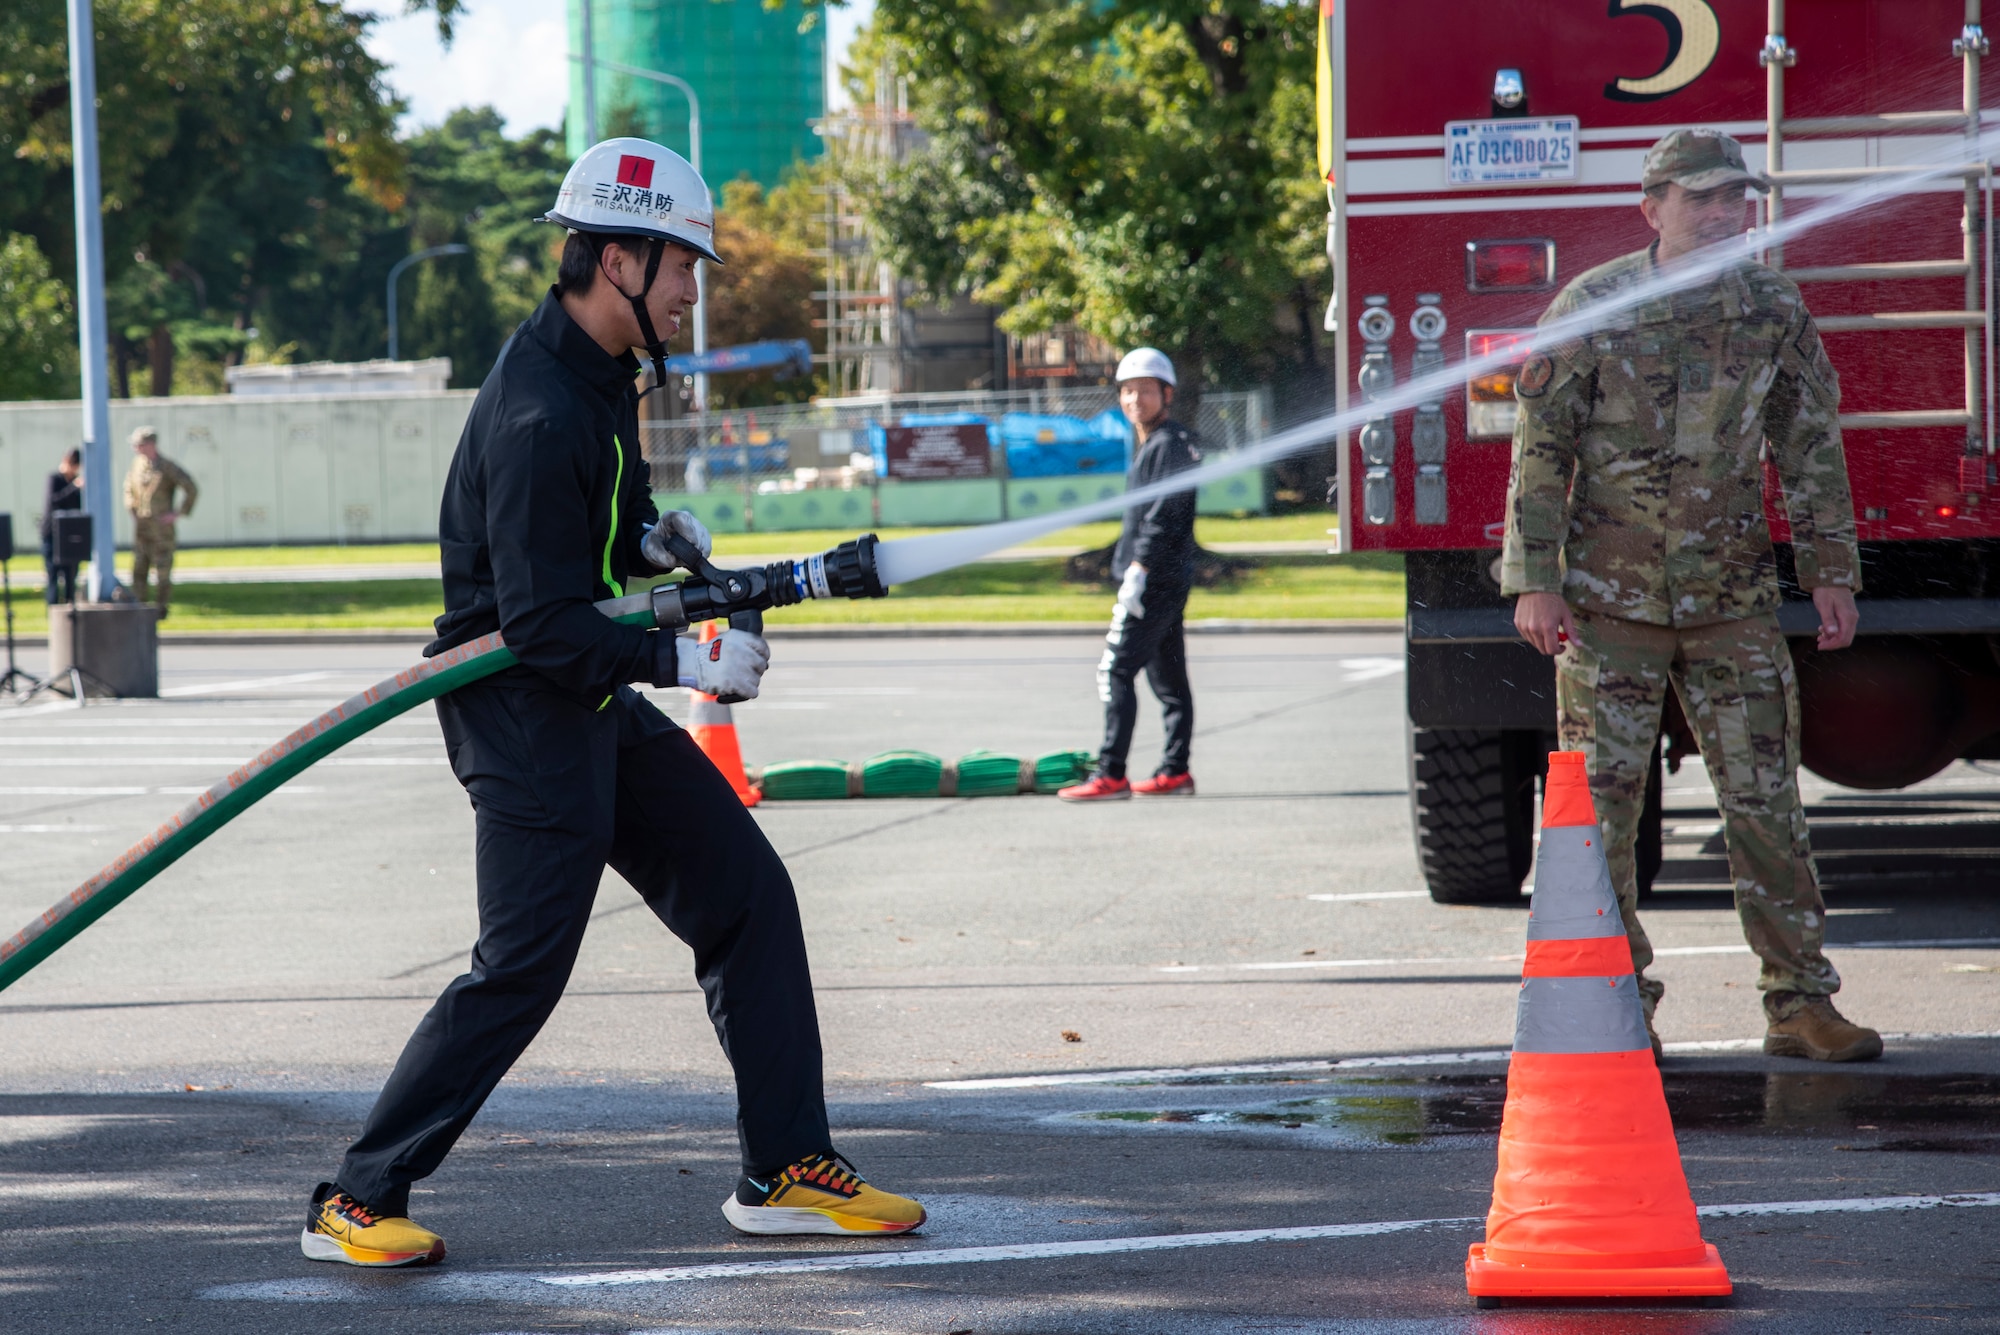 A member of Misawa City Fire Department sprays and demonstrates a water hose during the Misawa Air Base Fire Muster event at Misawa Air Base, Japan, Oct. 12, 2023.